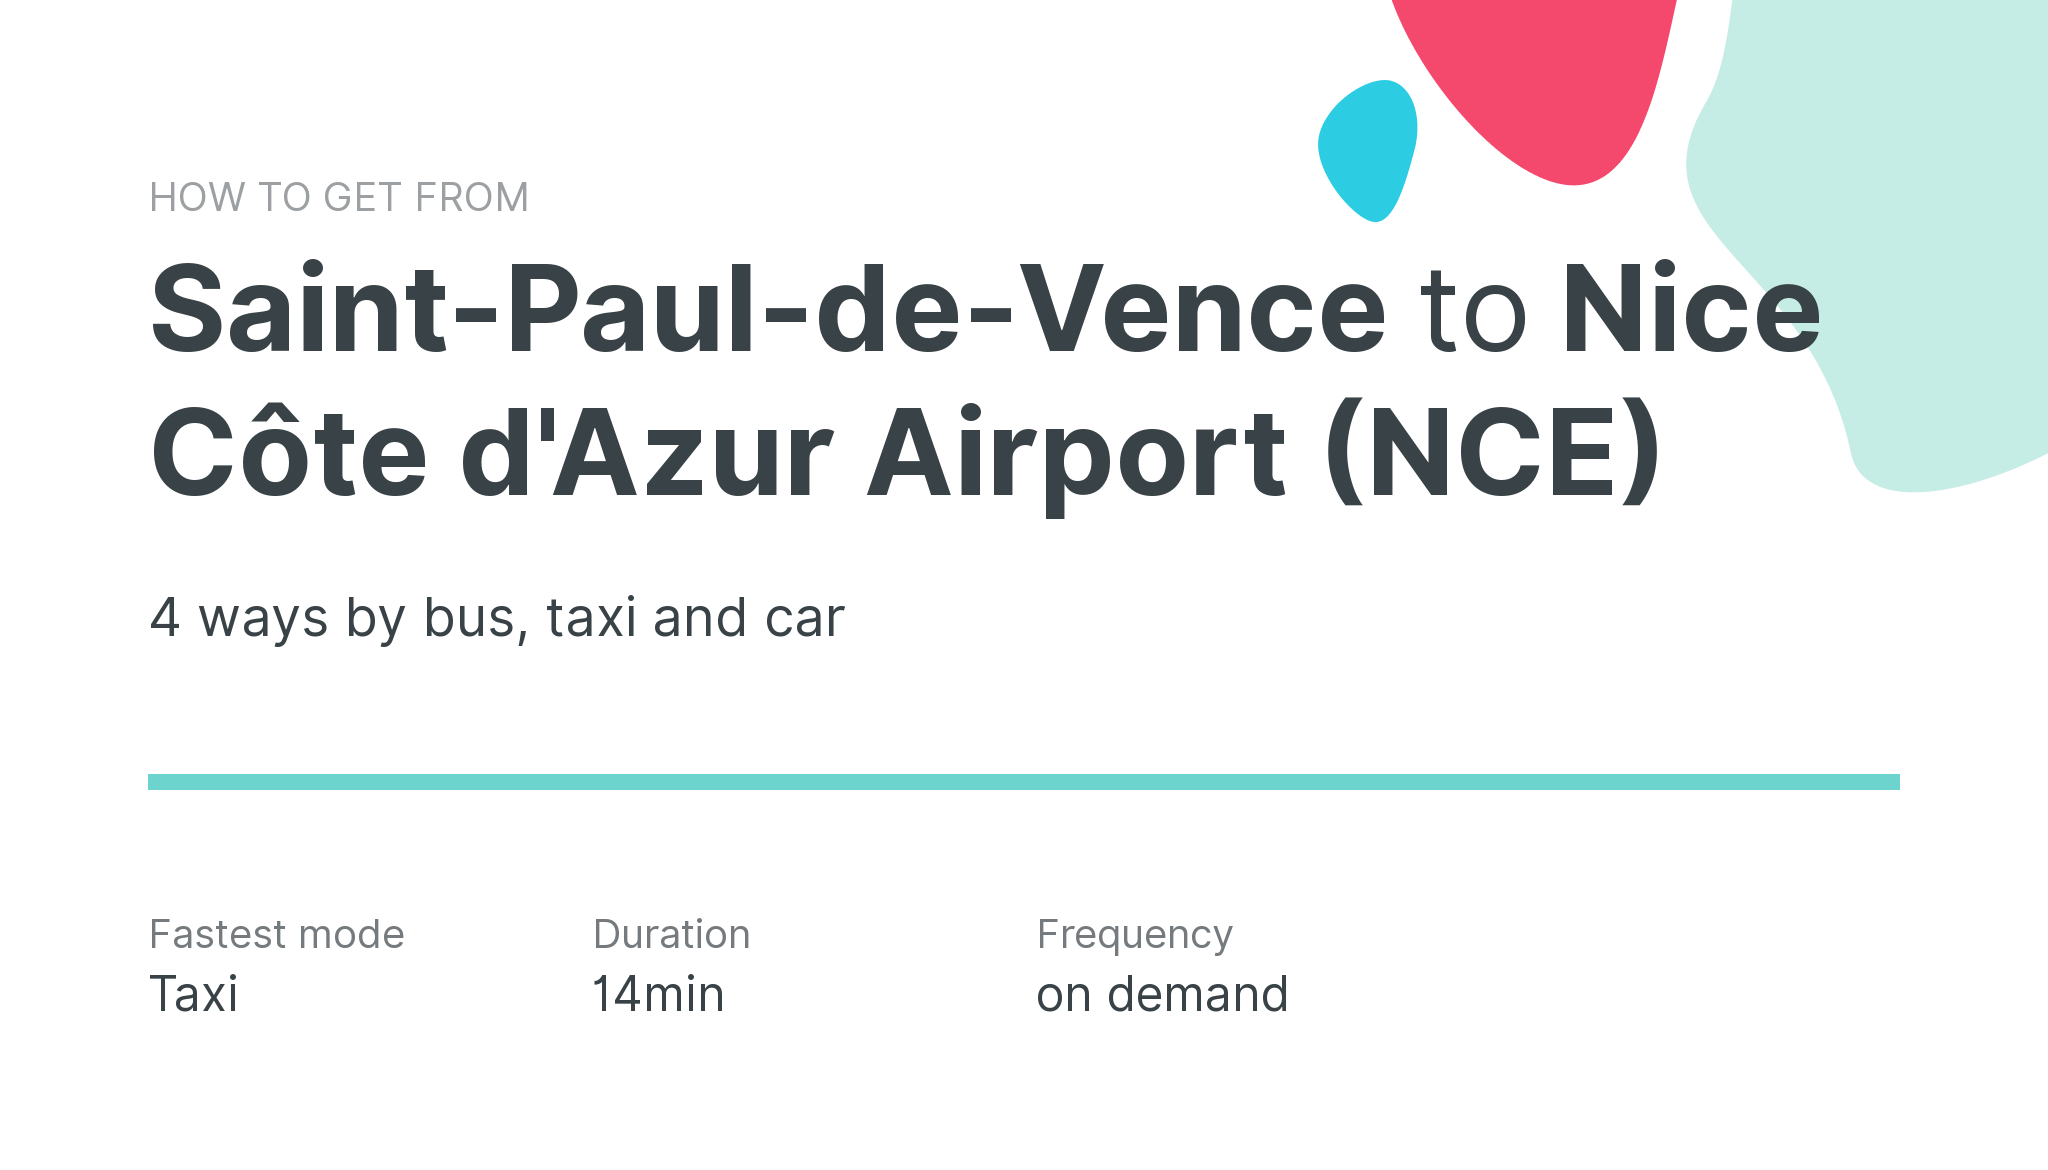 How do I get from Saint-Paul-de-Vence to Nice Côte d'Azur Airport (NCE)